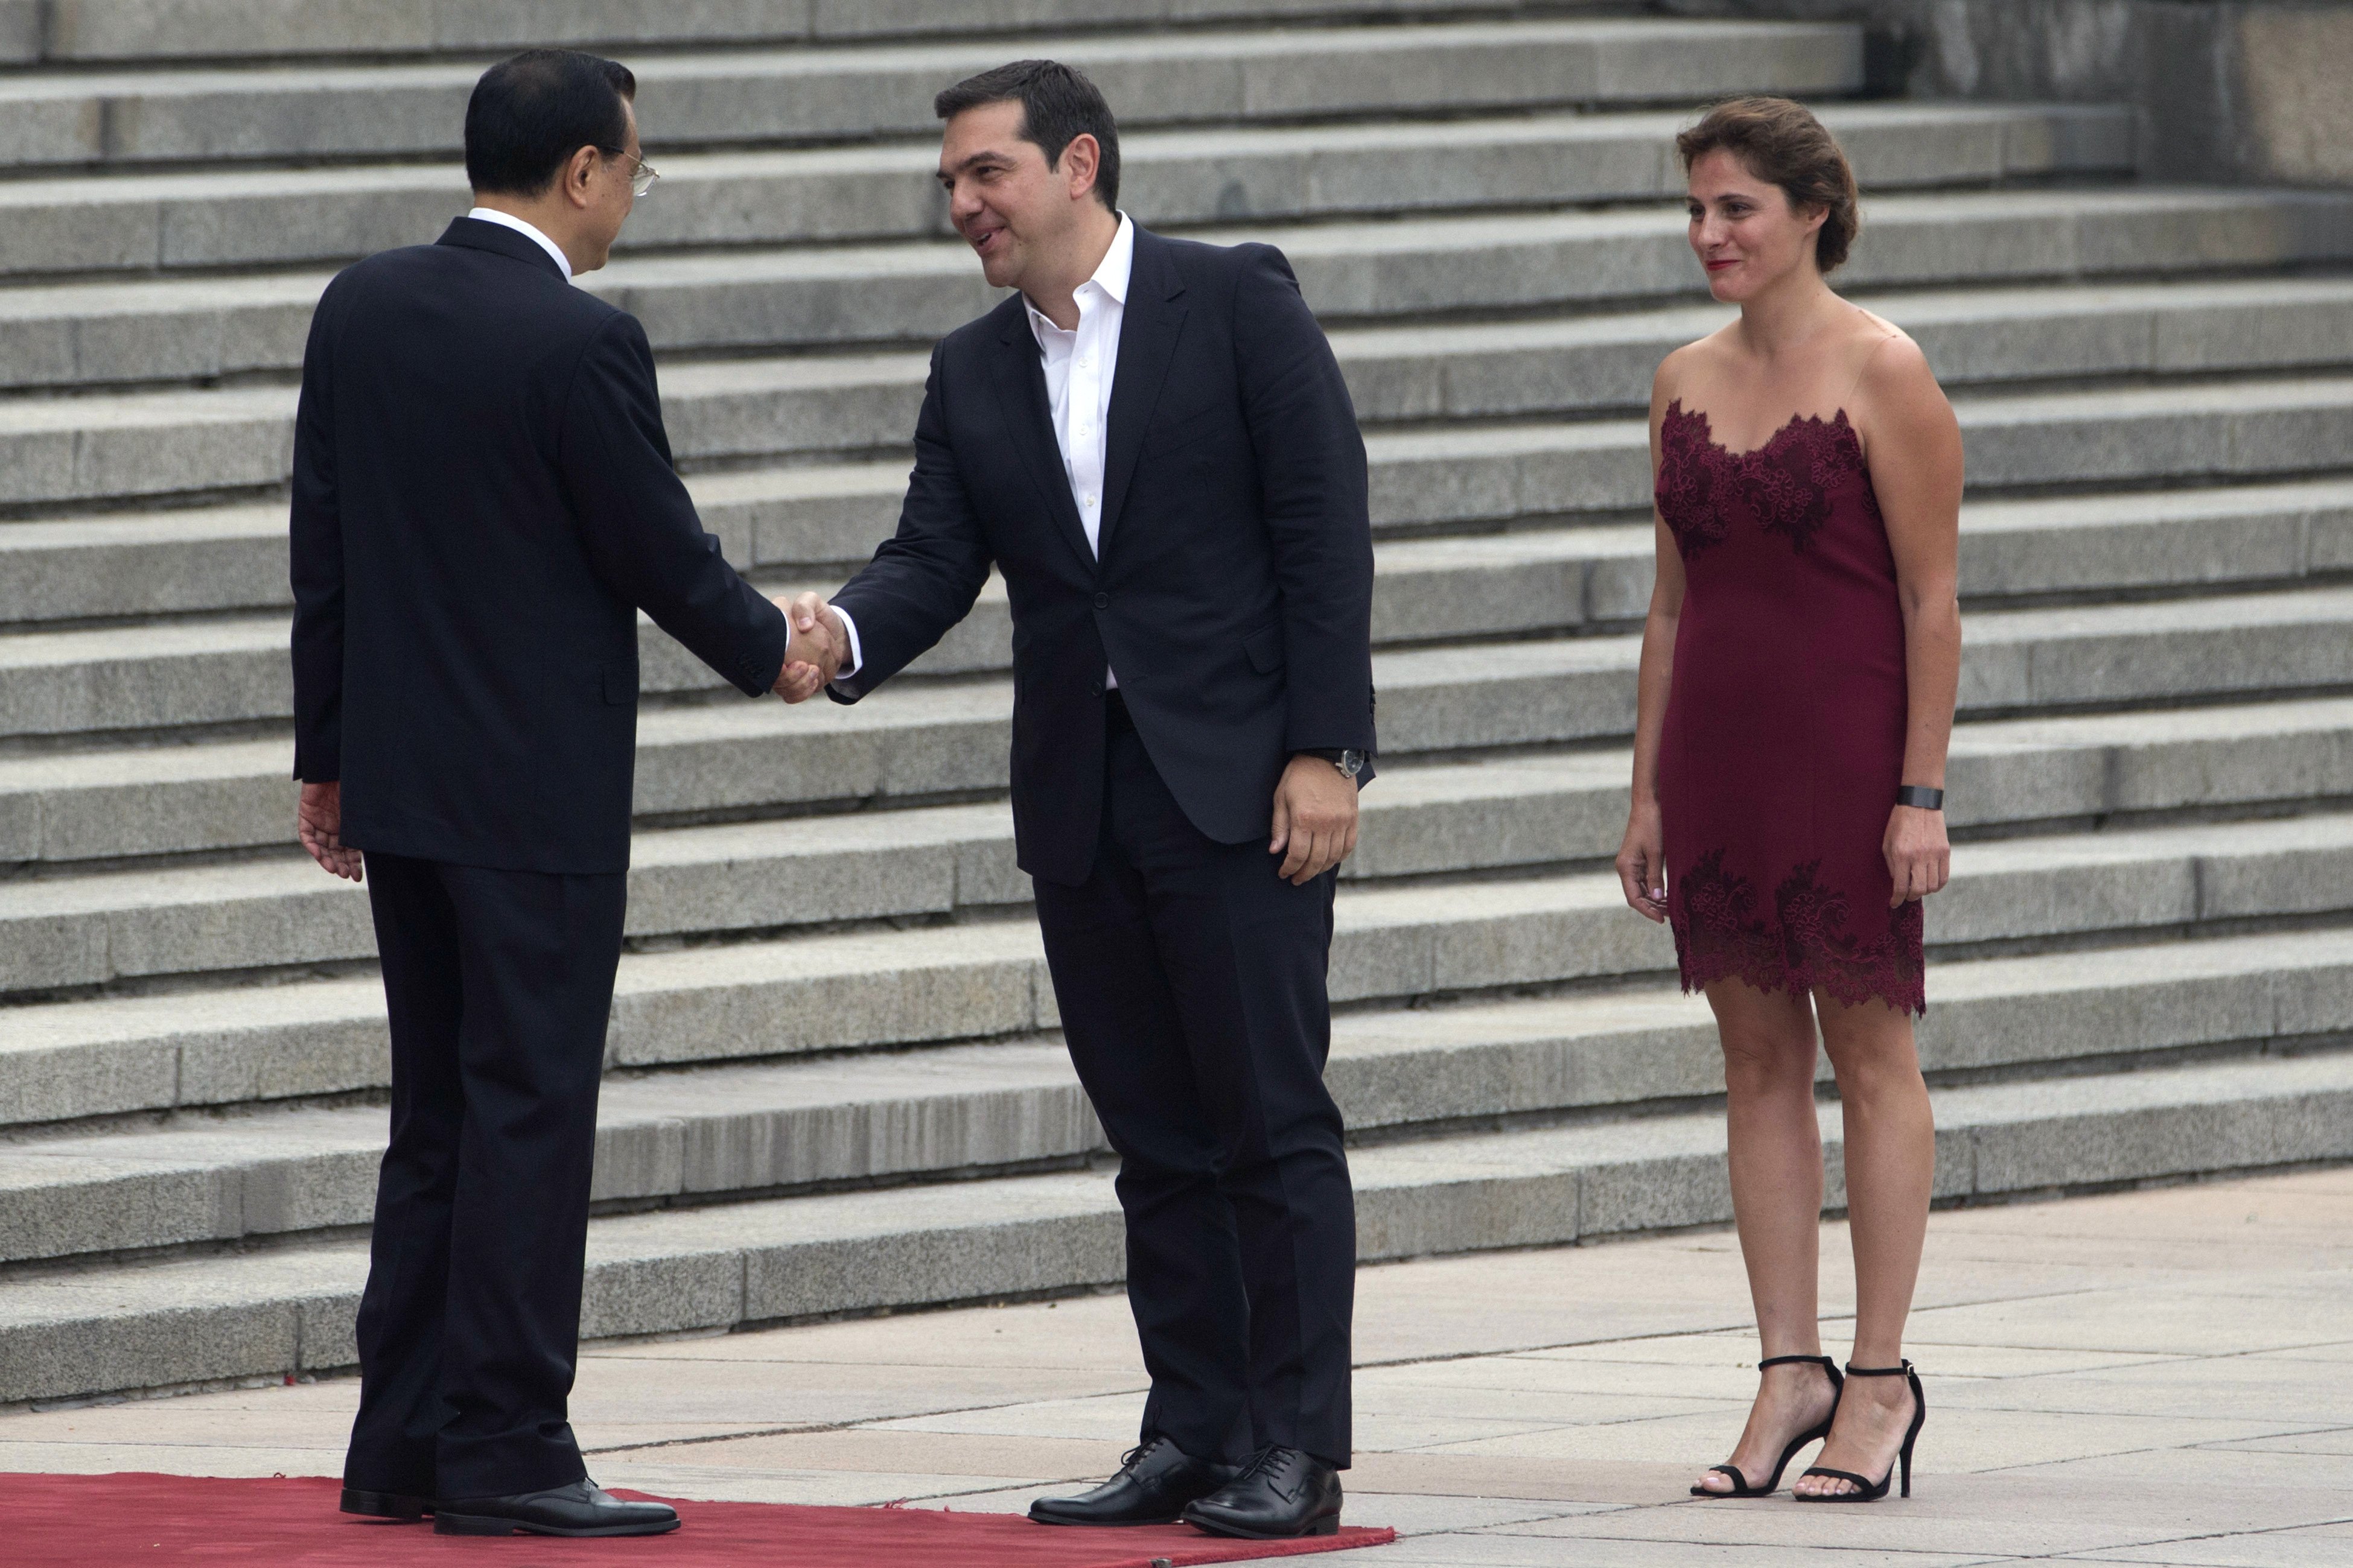 Greek Prime Minister Alexis Tsipras, center with his partner Peristera Baziana, right, is welcomed by Chinese Premier Li Keqiang at left during a welcome ceremony outside the Great Hall of the People in Beijing, China, Monday, July 4, 2016. (AP Photo/Ng Han Guan)